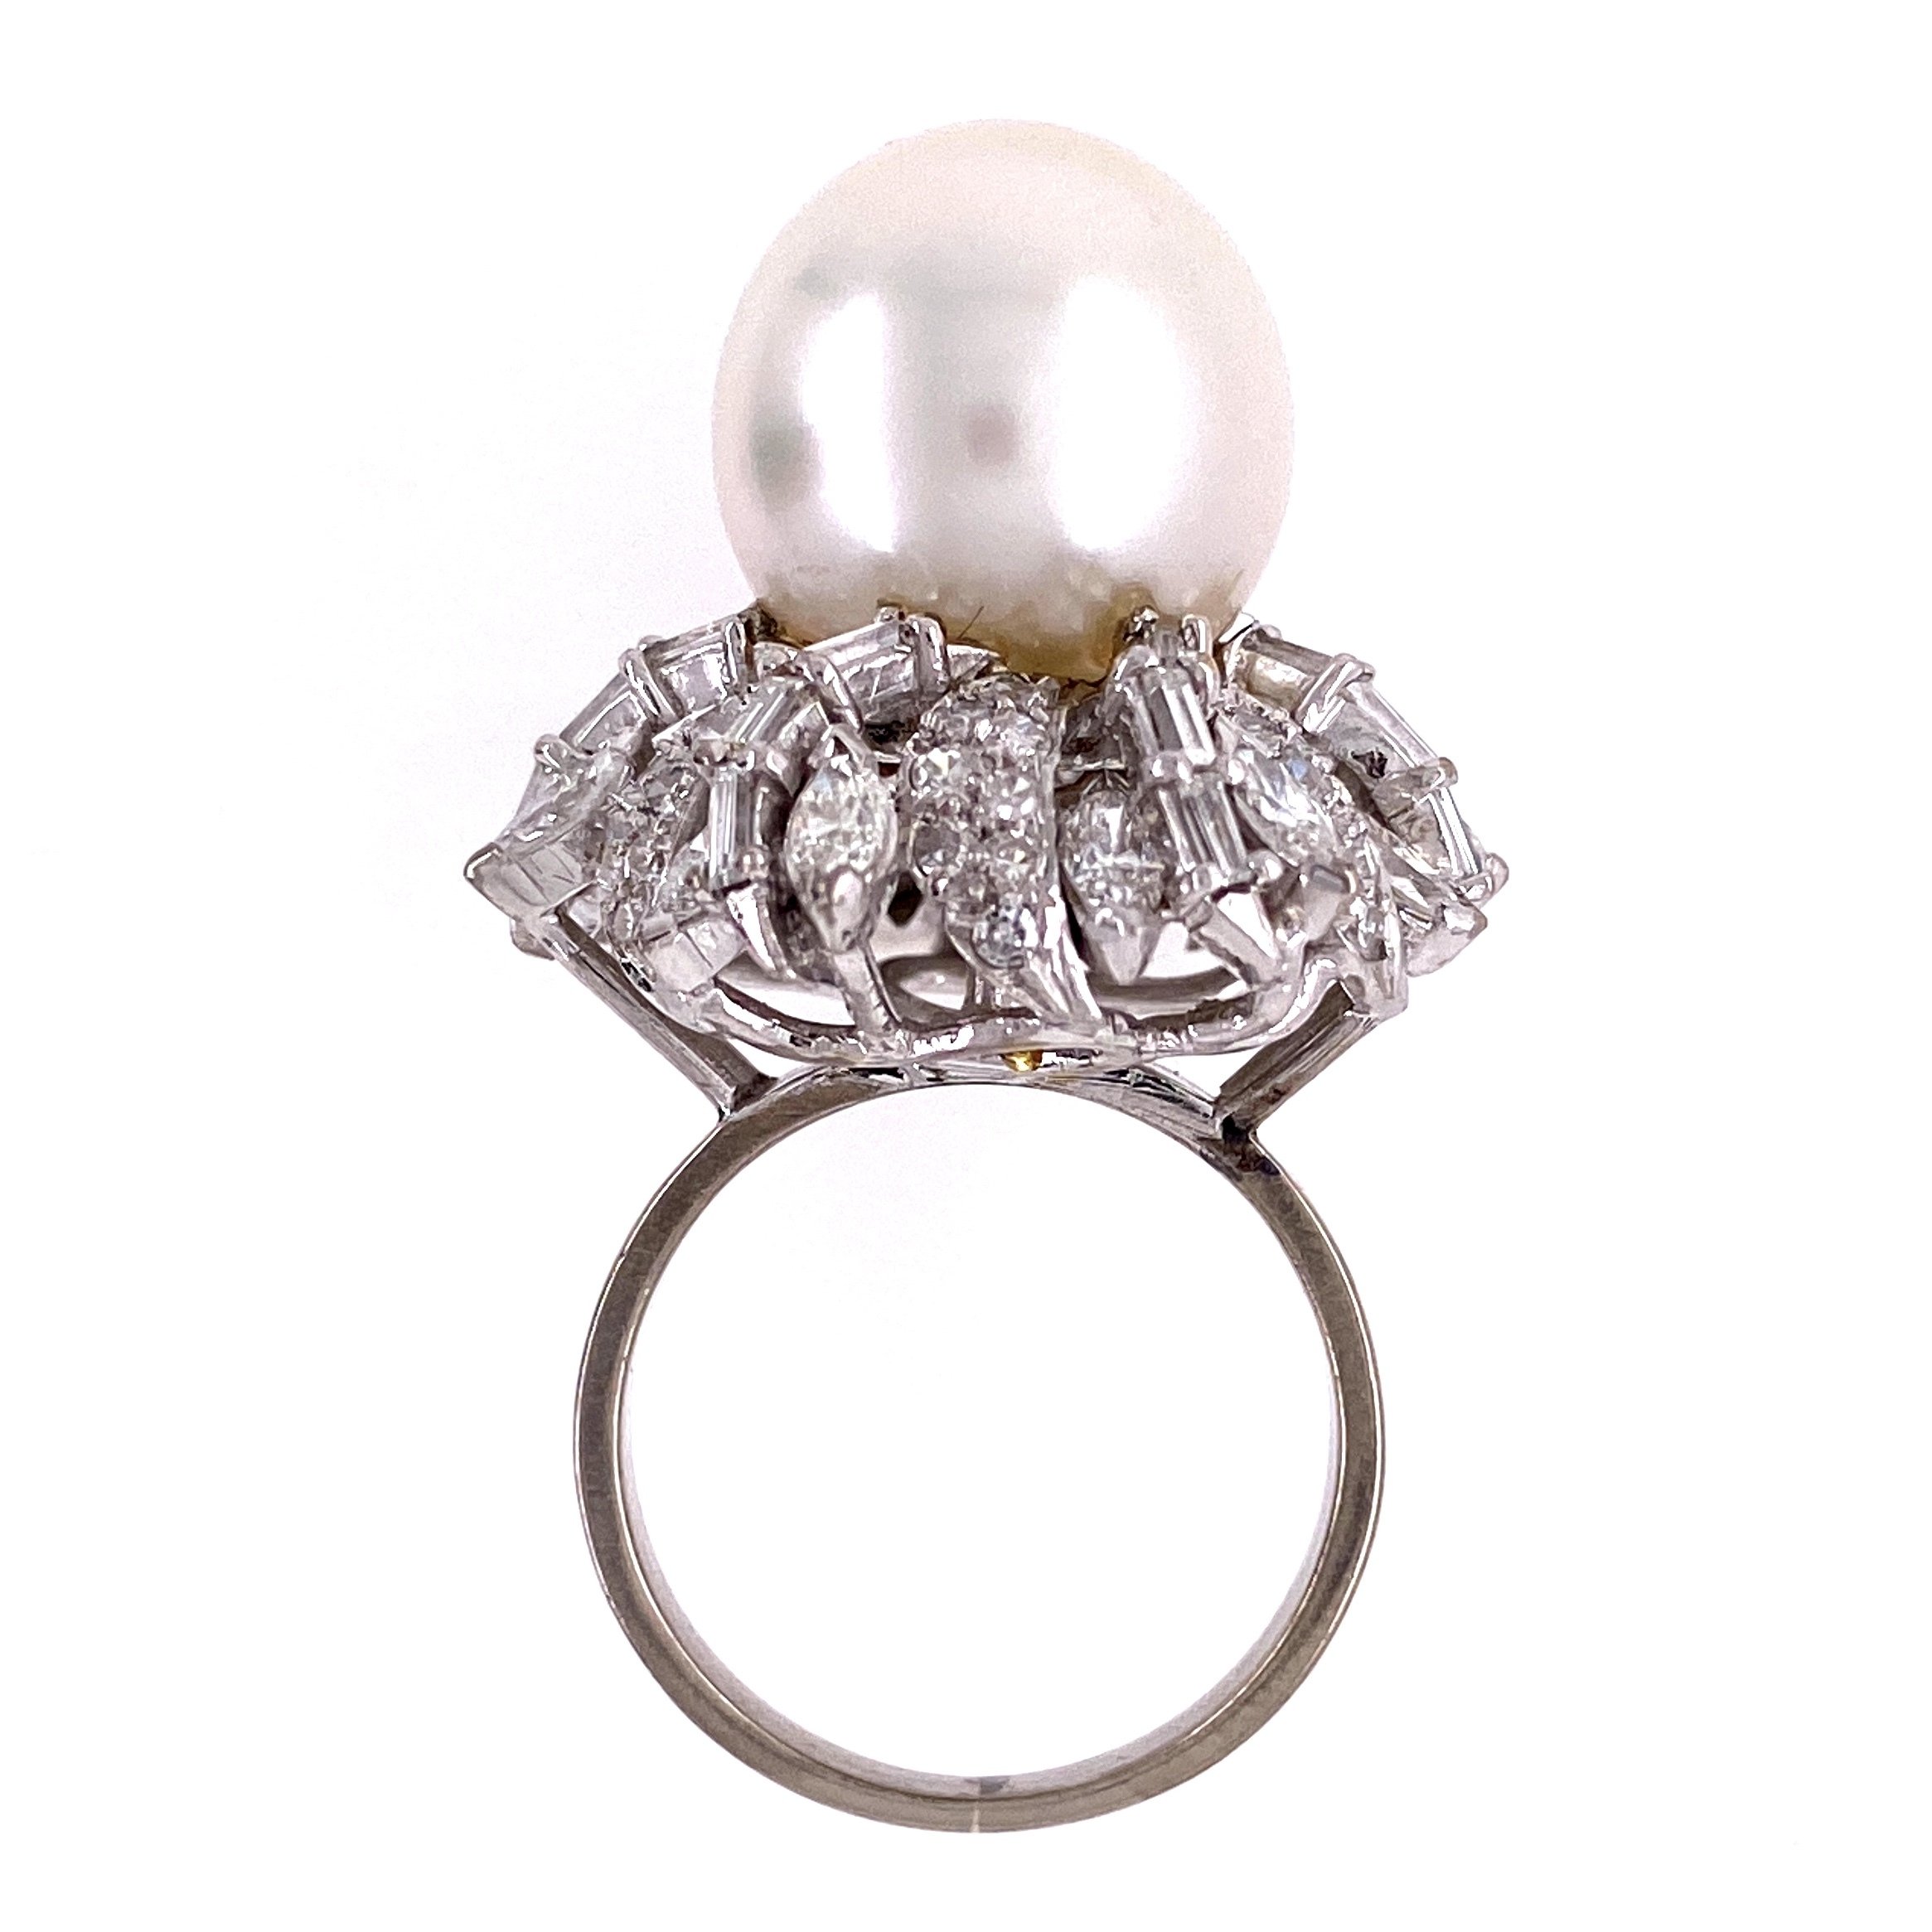 18K WG 12mm South Sea Pearl & 2.45tcw Baguette, Marquis & Round Diamond Ring 12.8g, s5